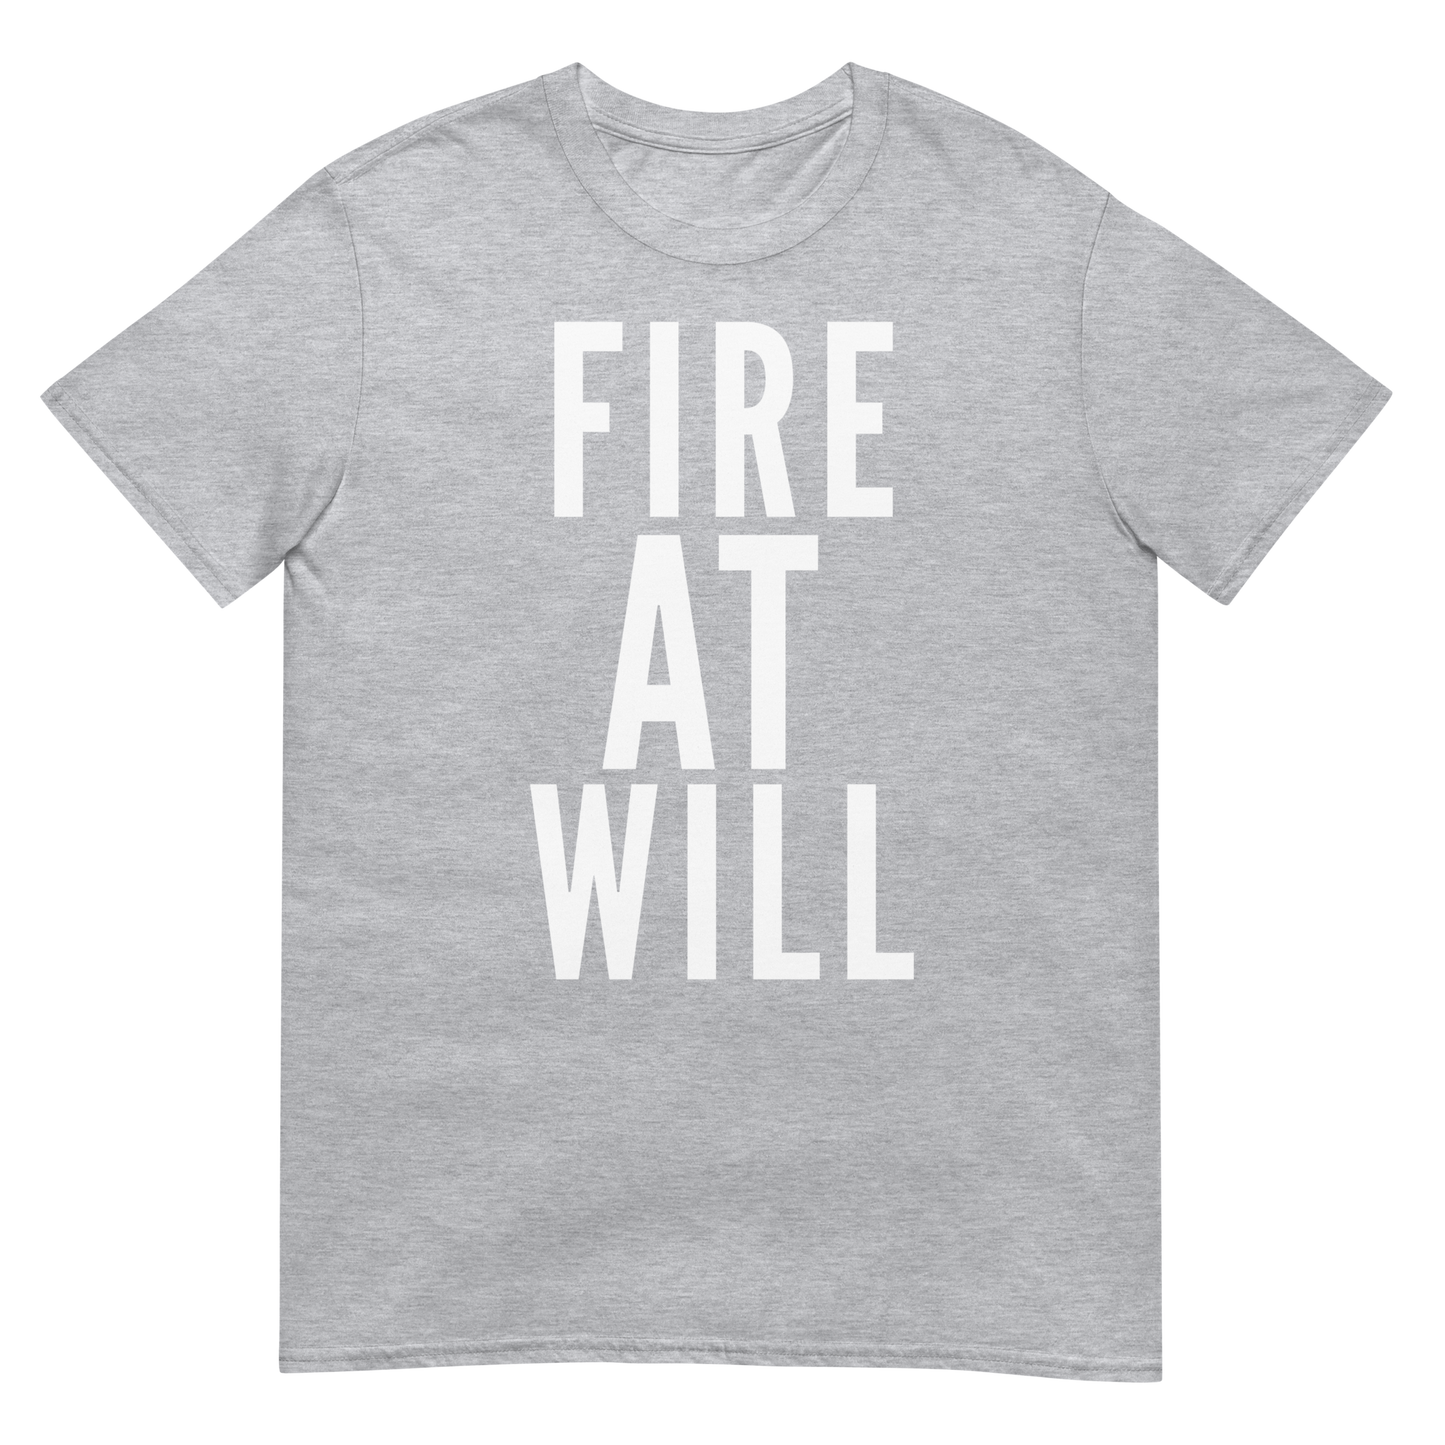 Fire At Will (t-shirt)